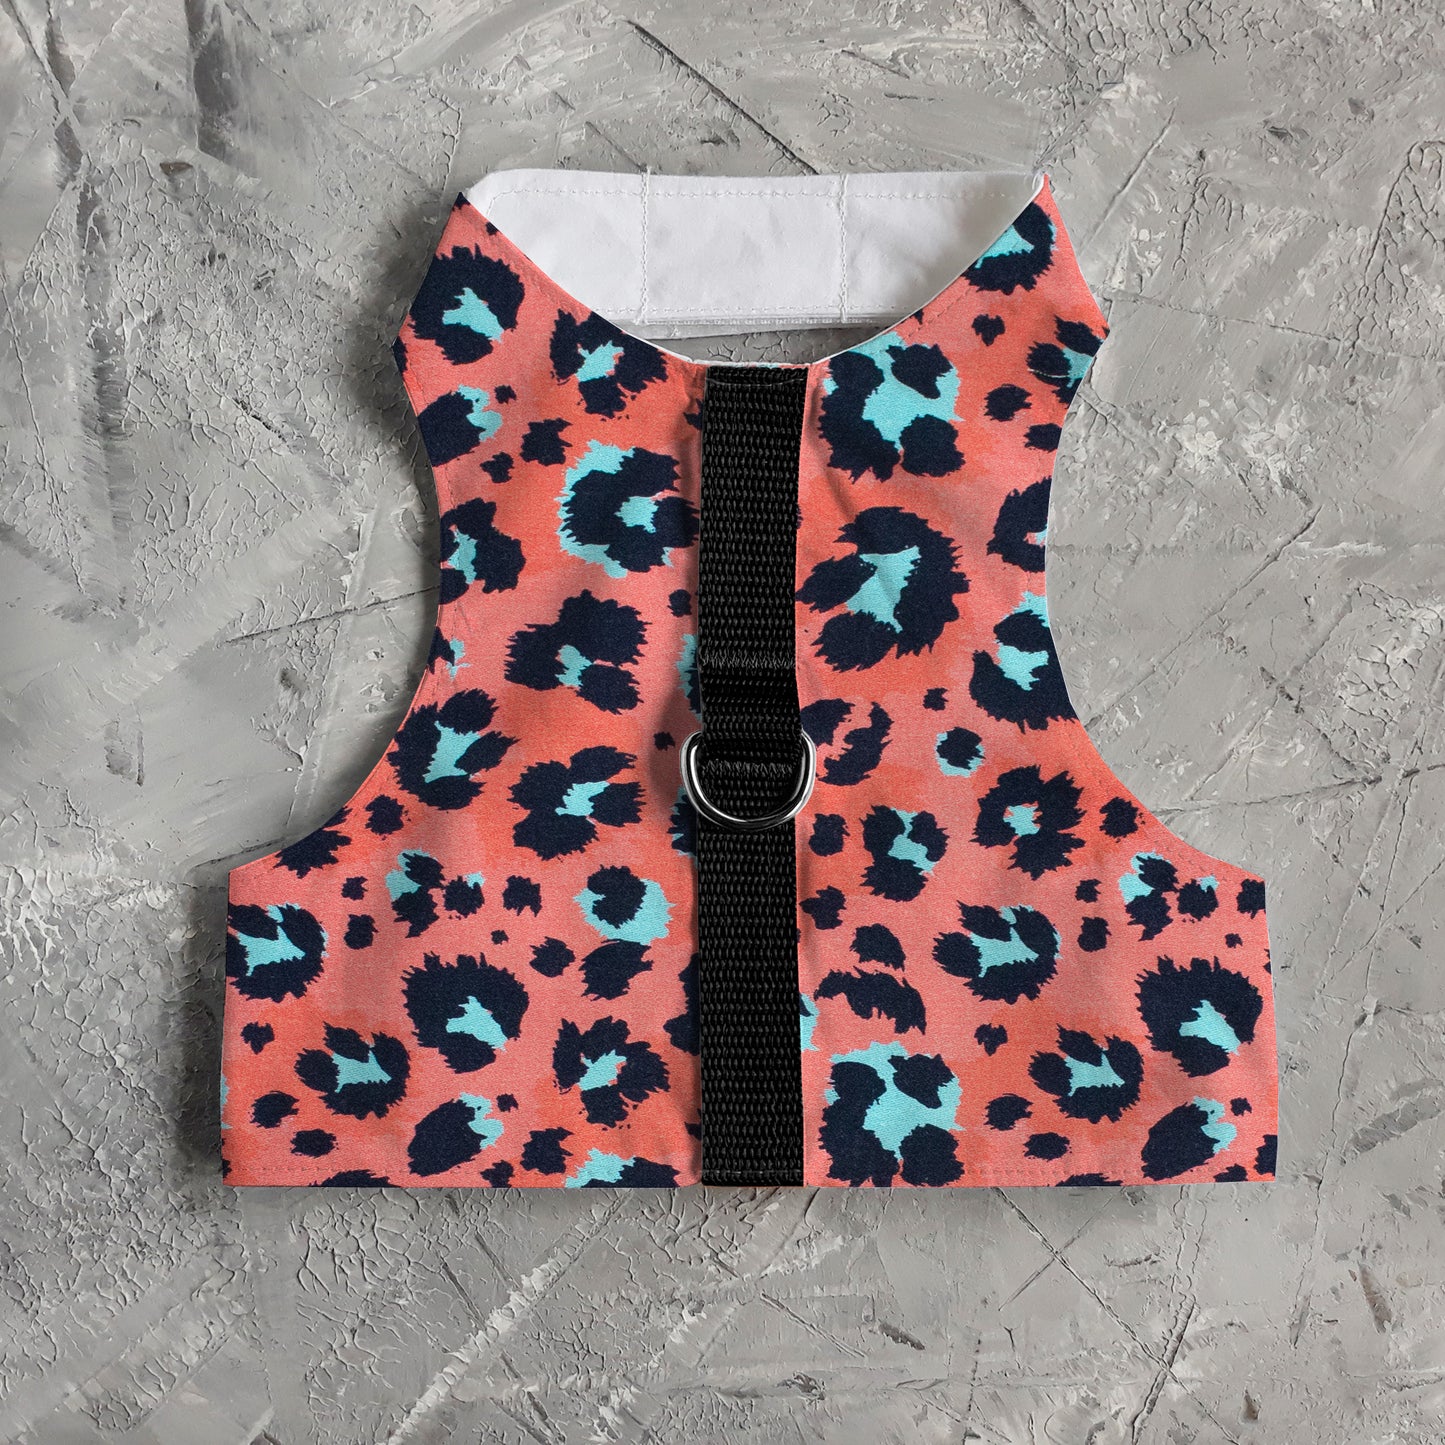 Difficult to escape and safety cat harness. Breathable cotton vest "Pink leopard"